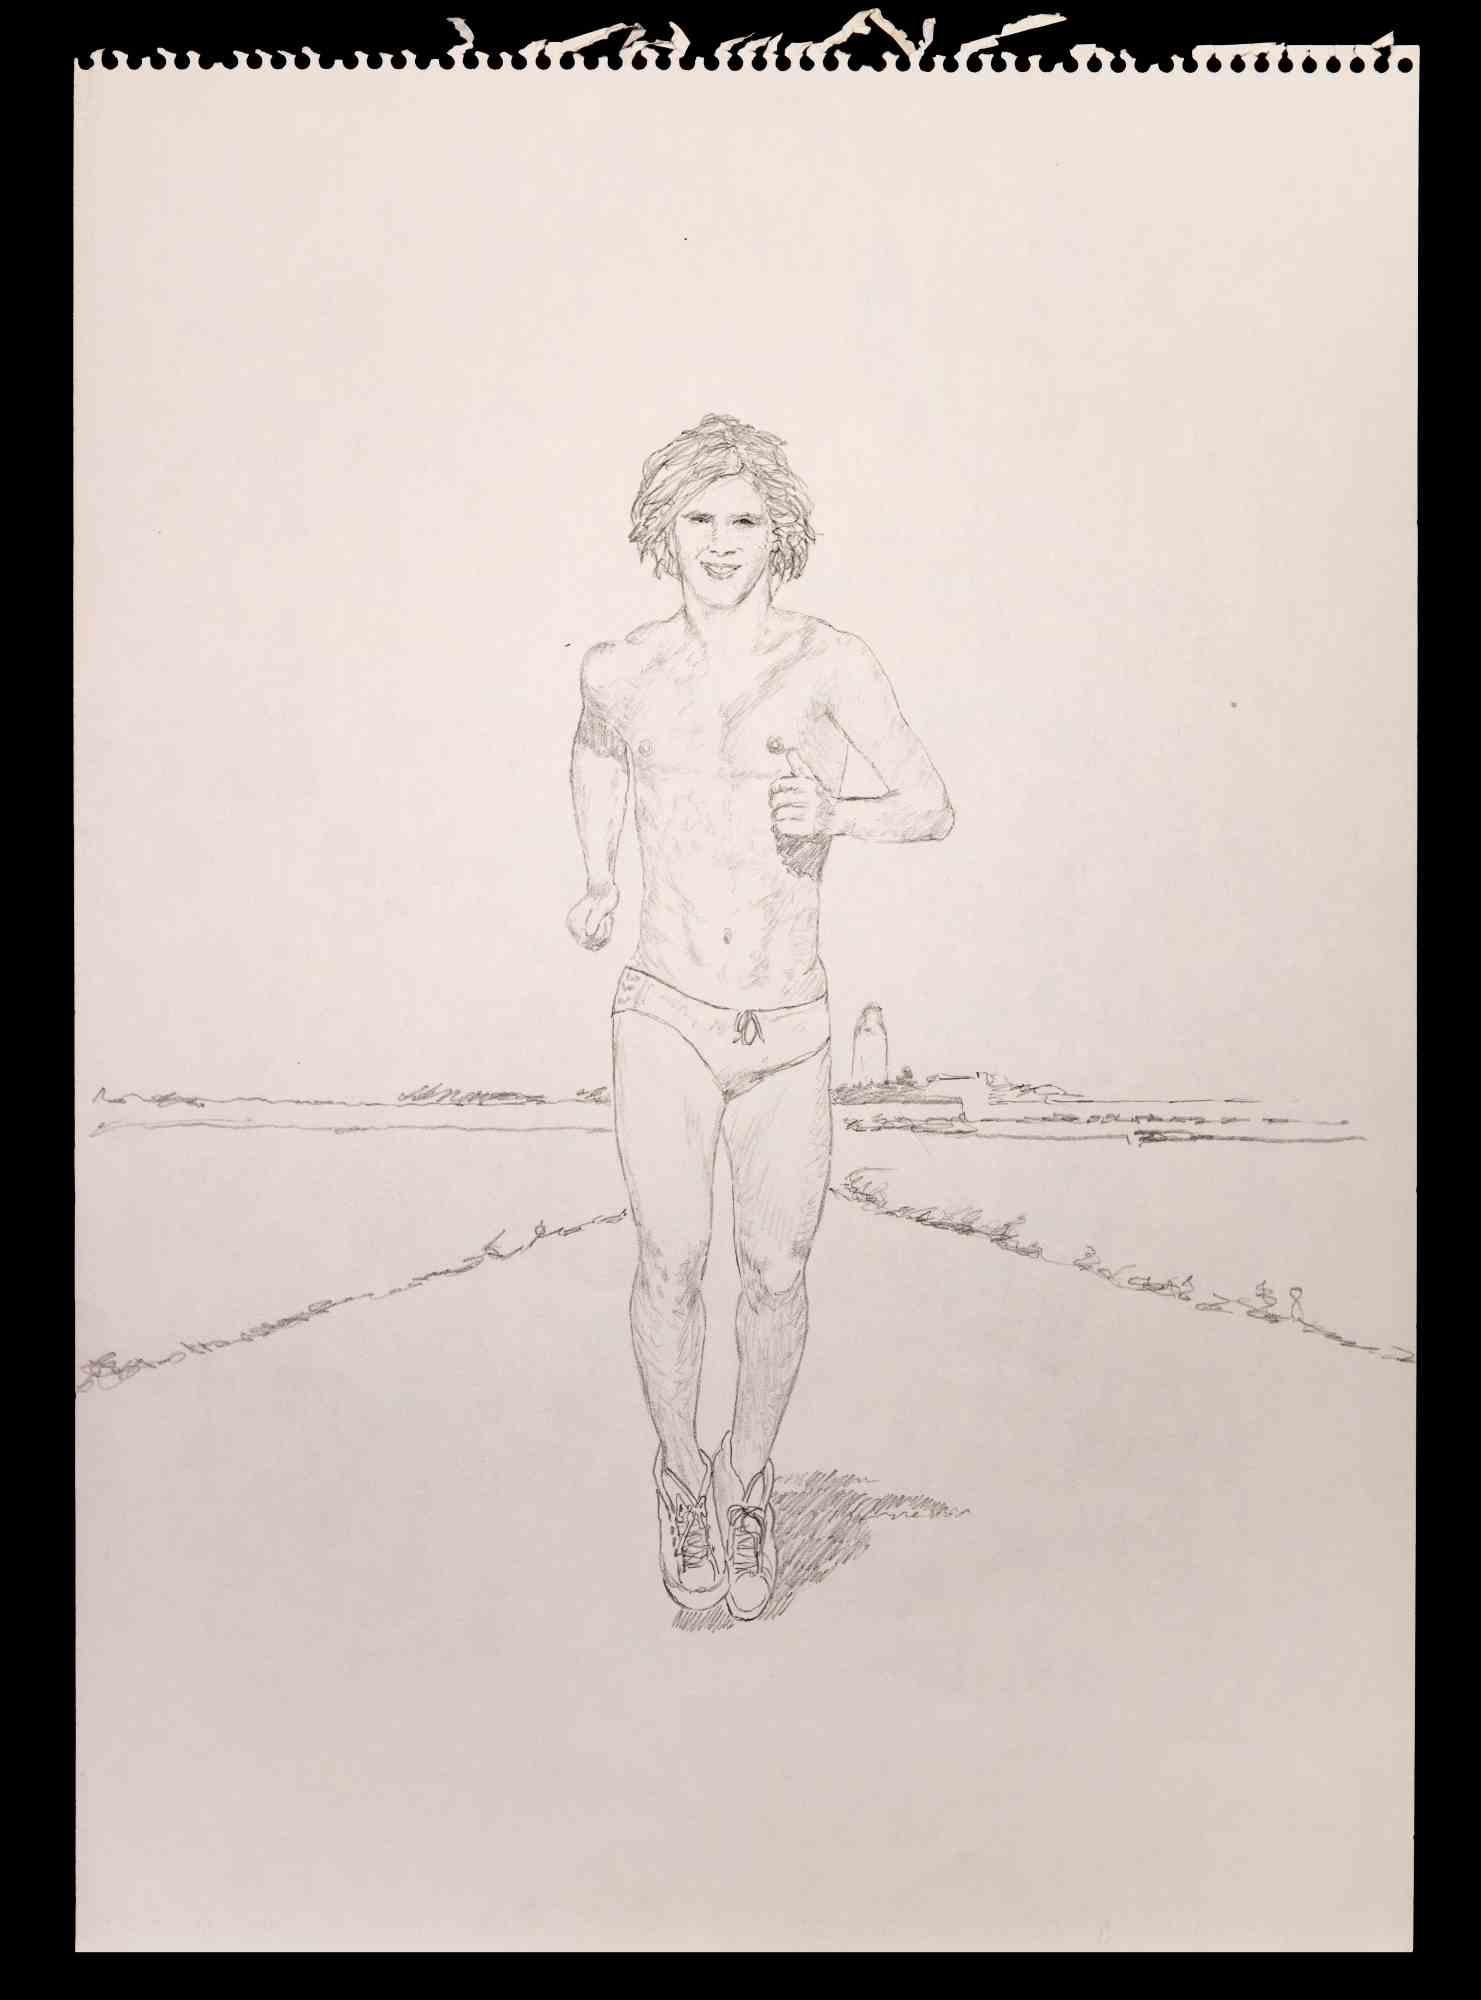 The Running Man is an original drawing in pencil realized by Anthony Roaland.

The artwork represents a fresh and beautiful nude male. Behind the landscape is depicted with simple and essential lines.

Good conditions.